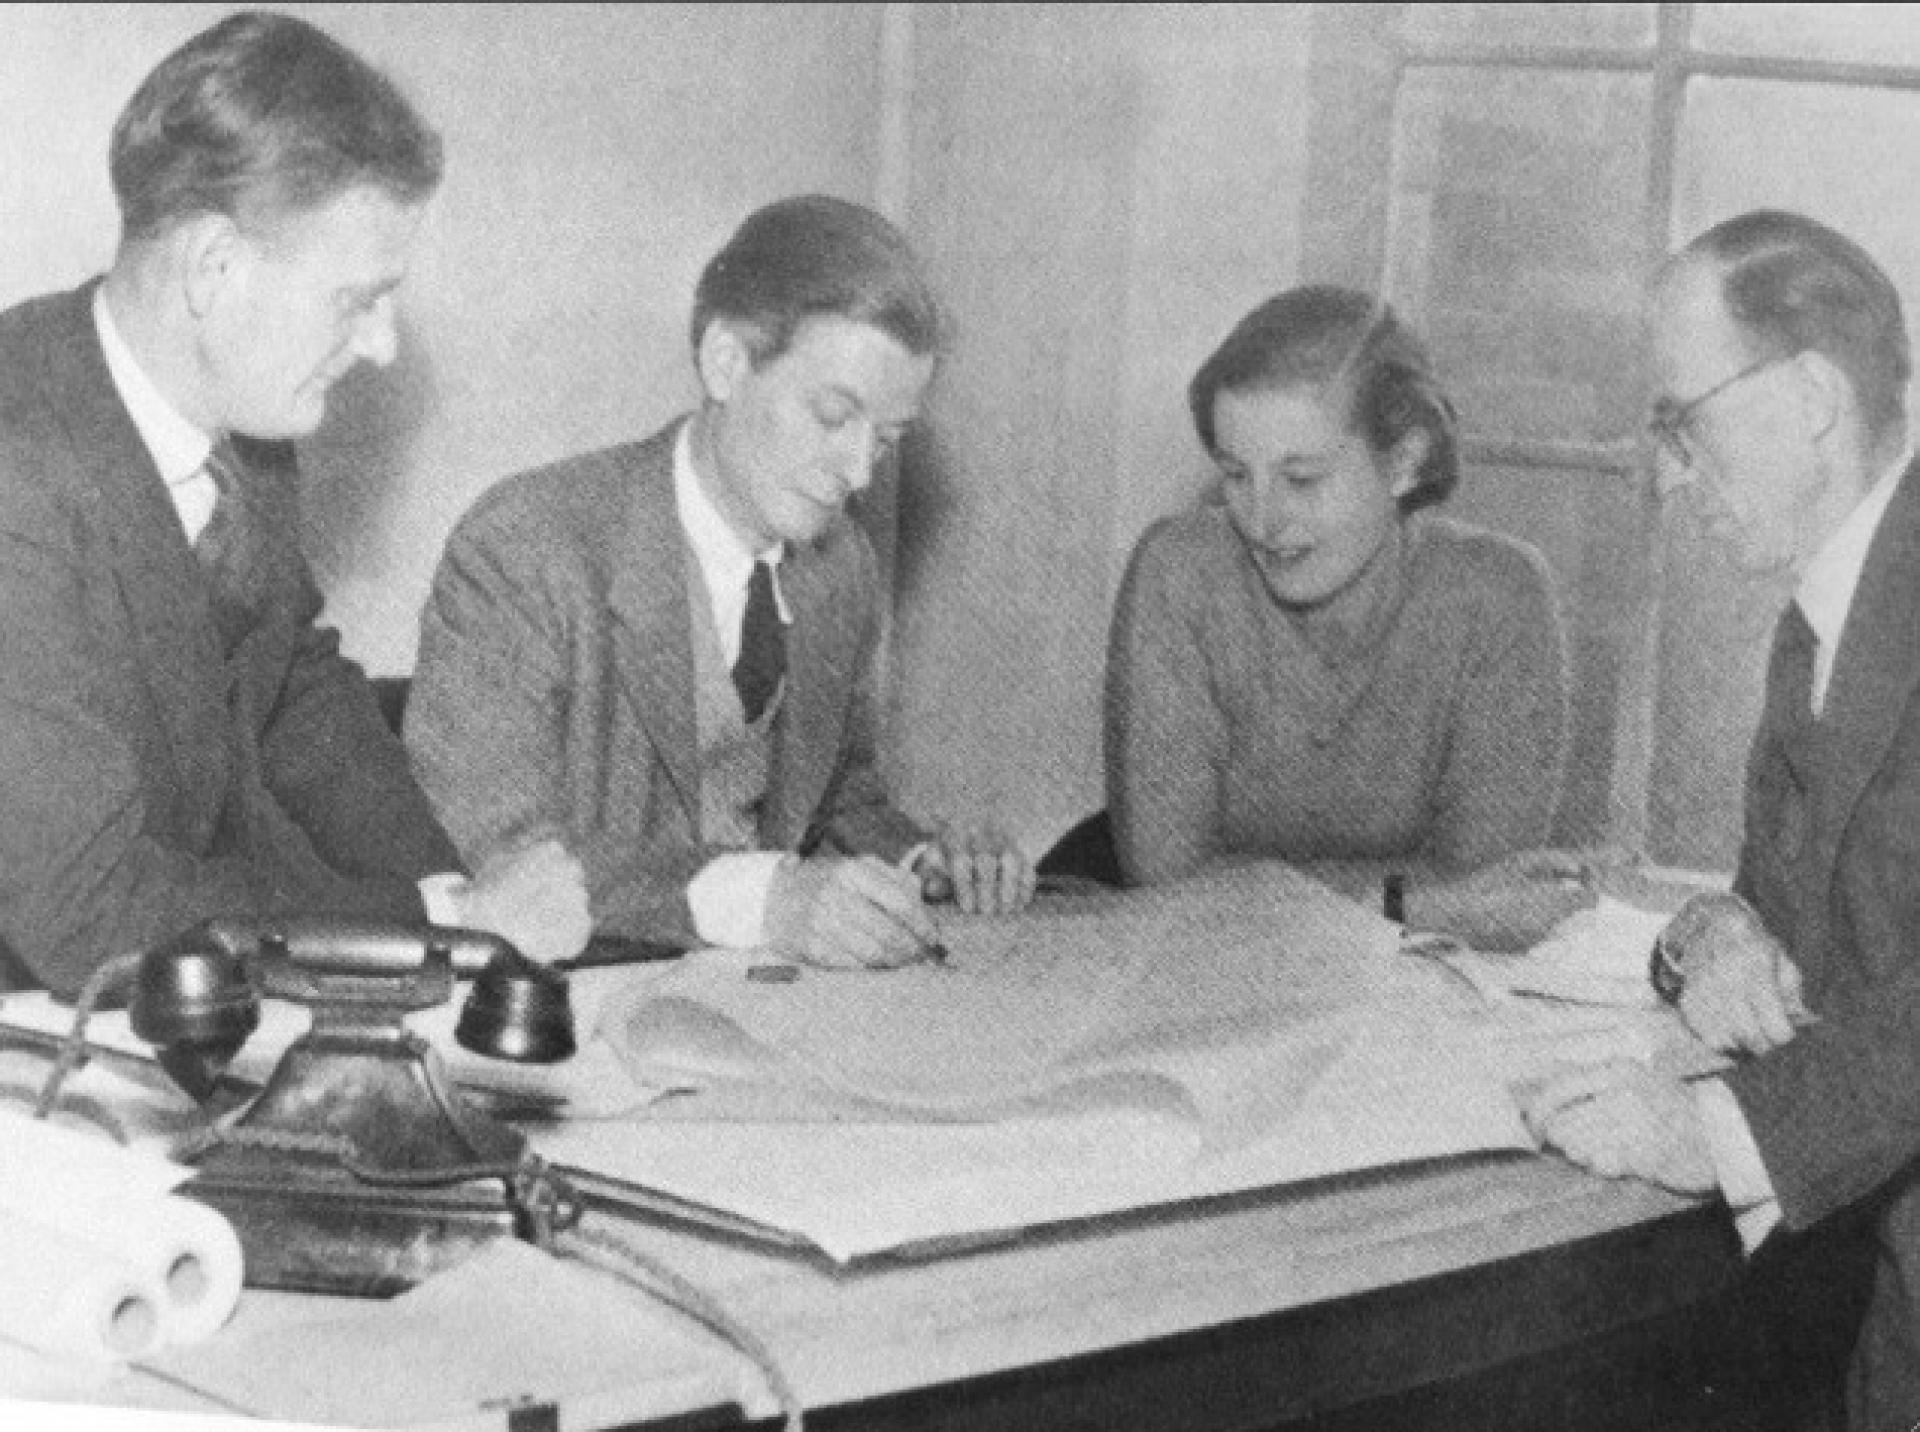 Rosemary Stjernstedt with her fellow architects in the LCC Housing Division (1950). | Image via Guardian